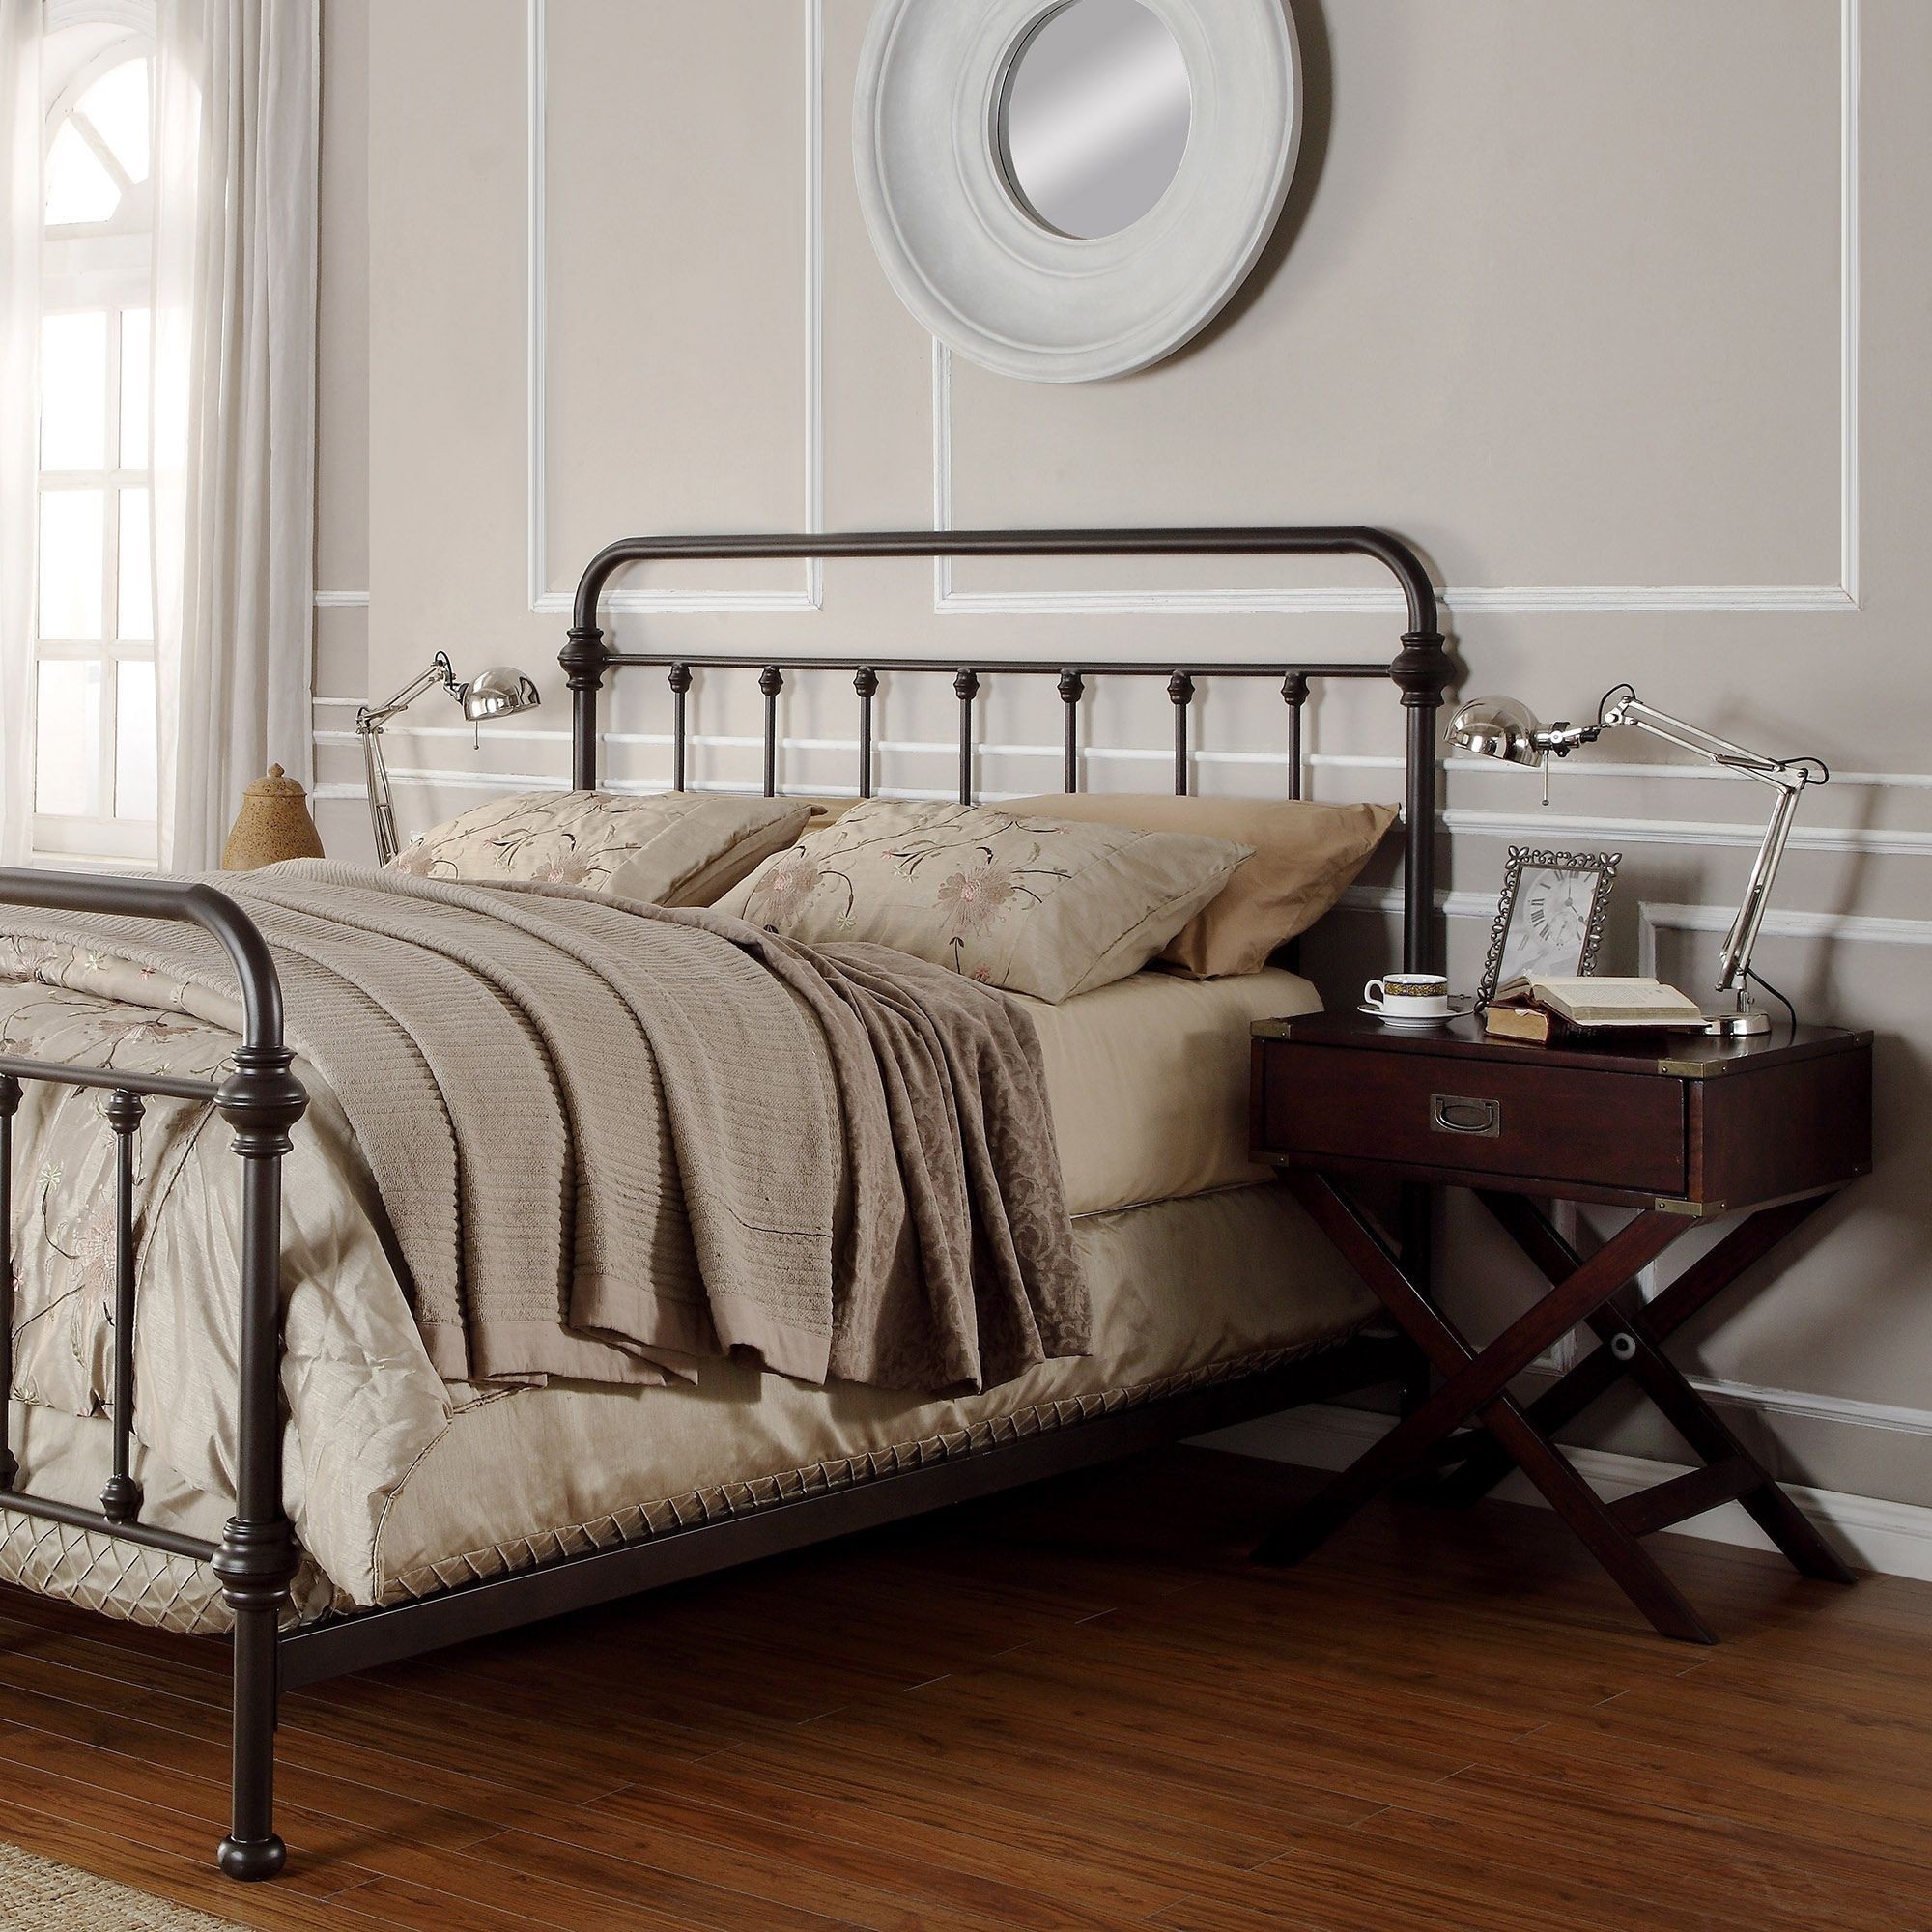 Tribecca Home Giselle Antique Dark Bronze Graceful Lines Victorian Iron Metal King Size Bed